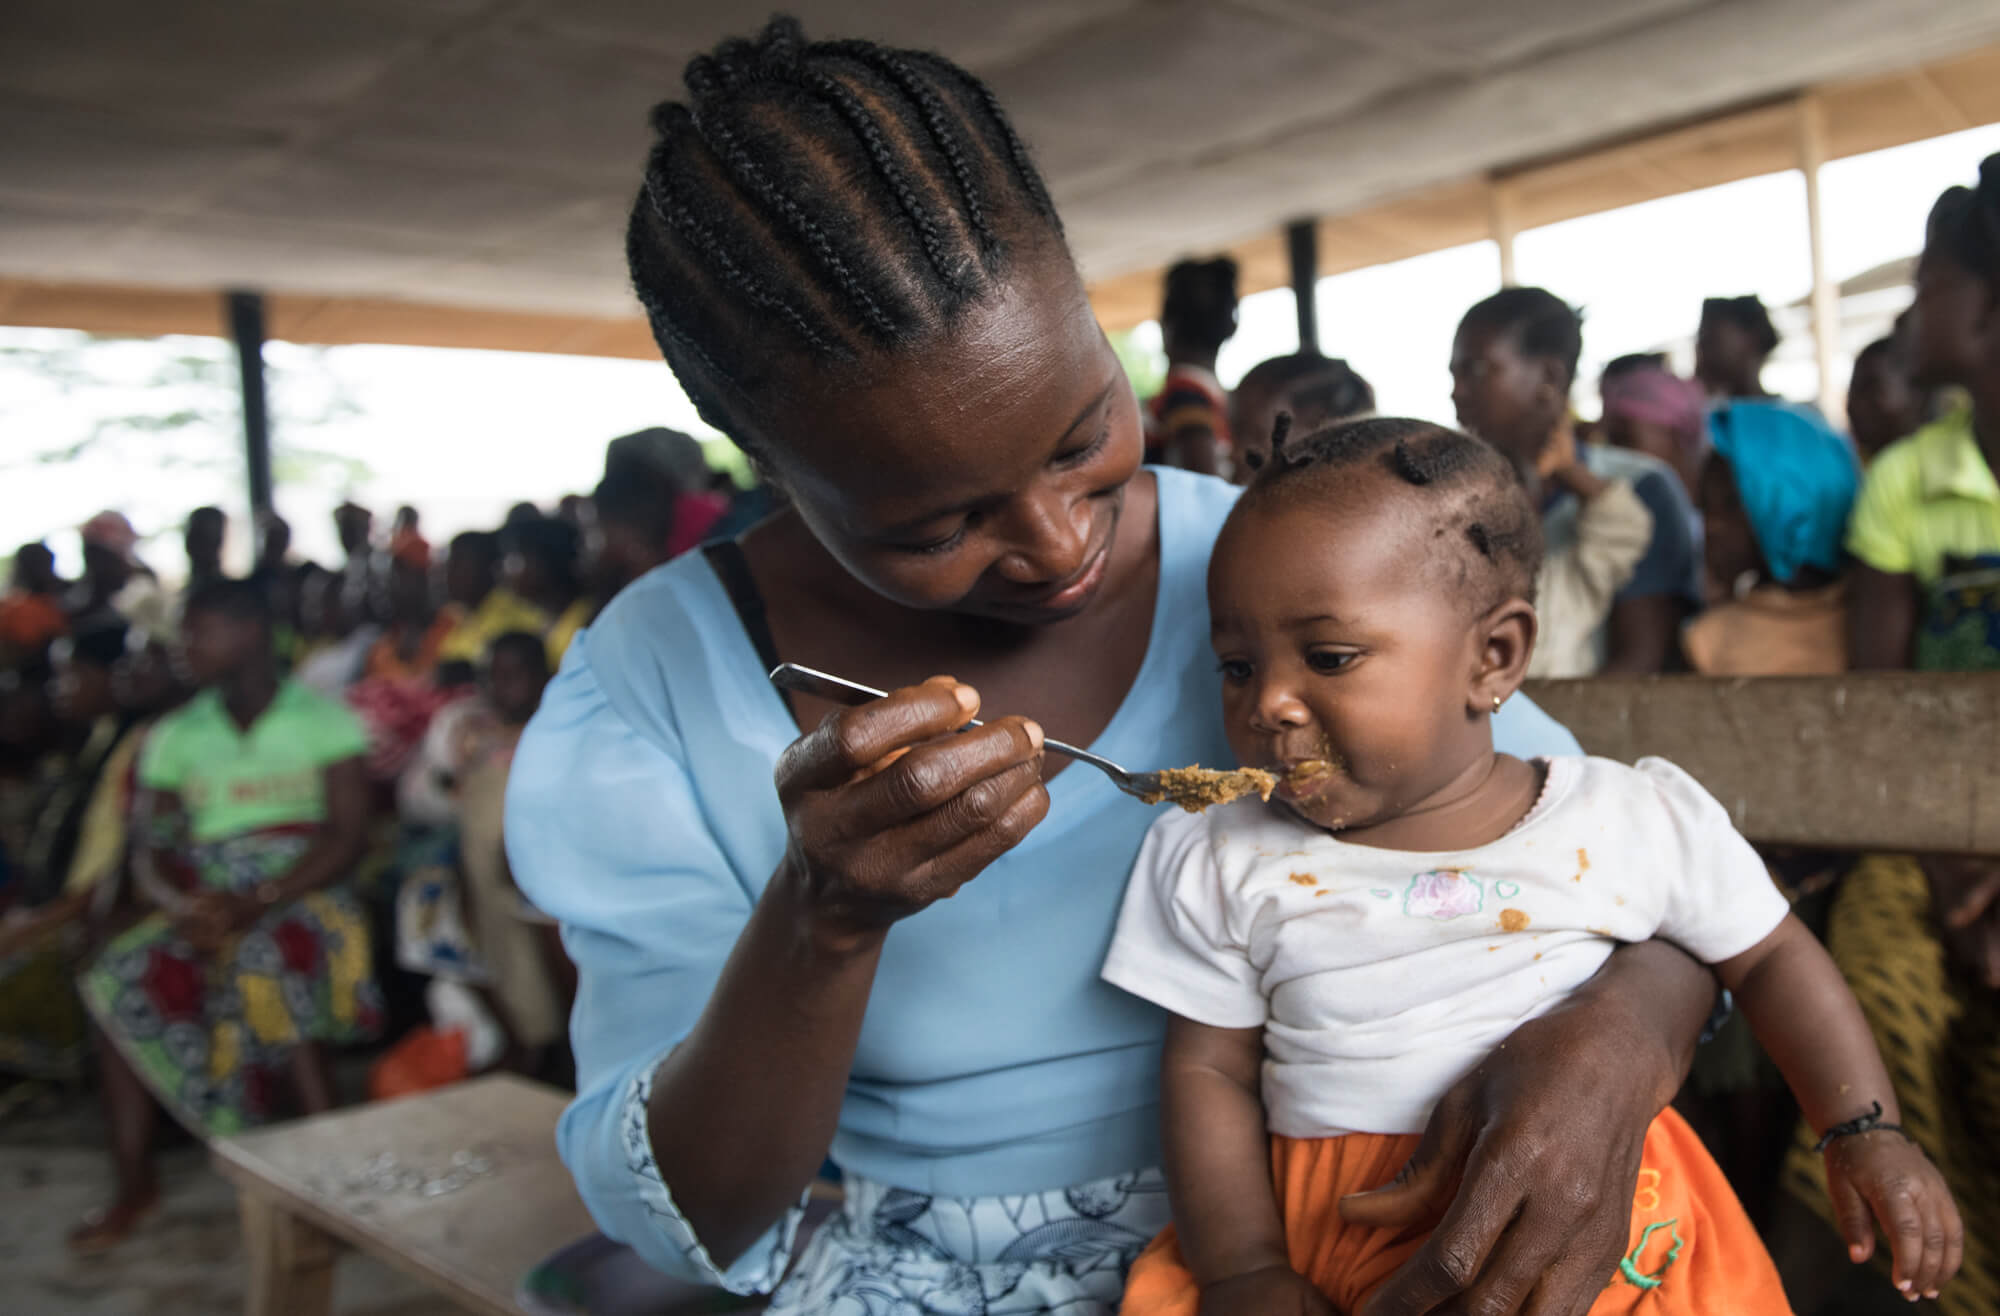 Yassa feeds her baby girl with nutritious, homemade food.